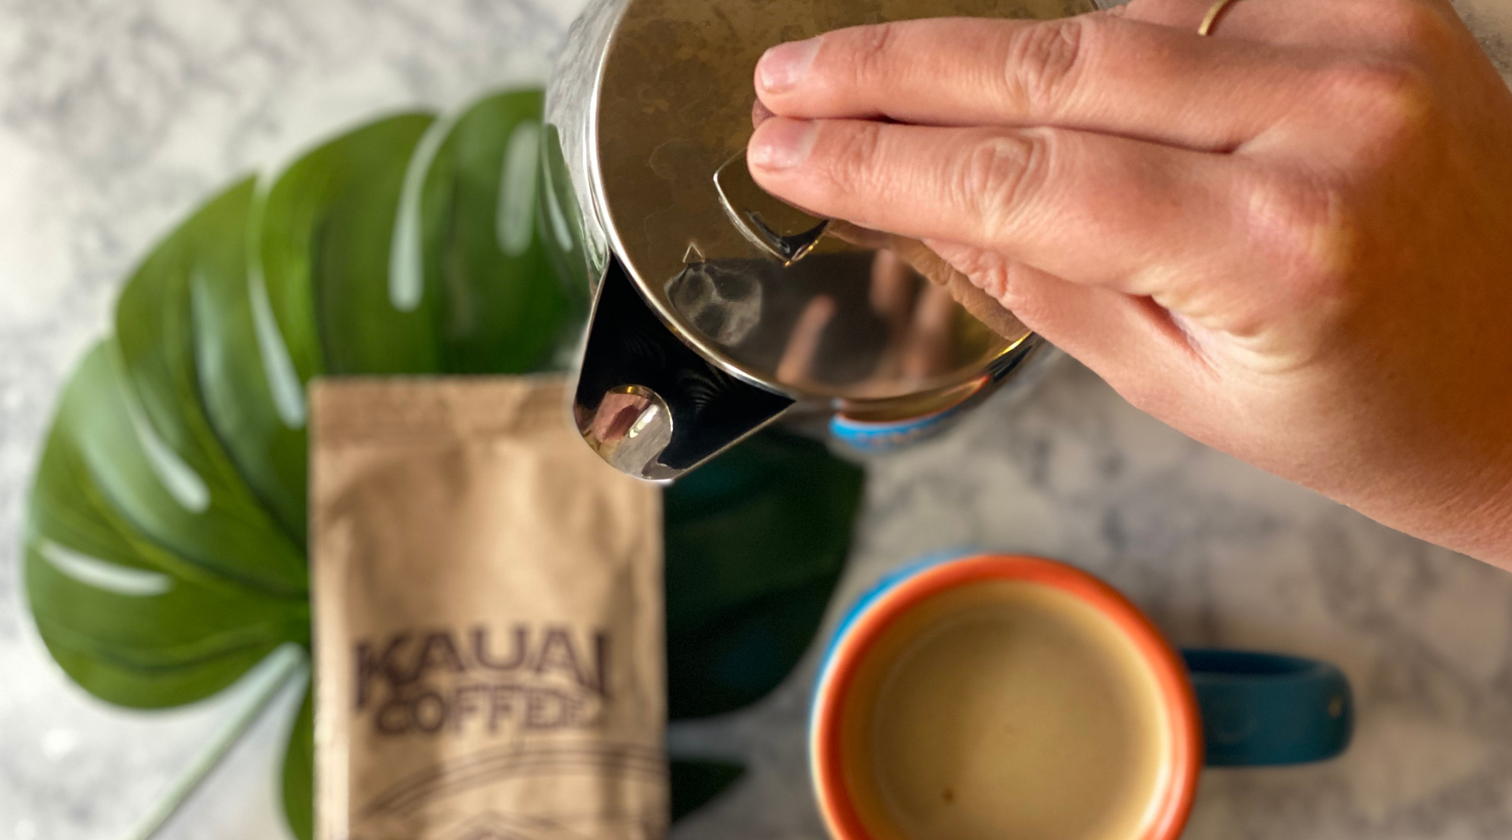 An overhead view of a hand pressing the plunger on a silver French Press. A bag of Kauai Coffee Estate Reserve is visible on the table